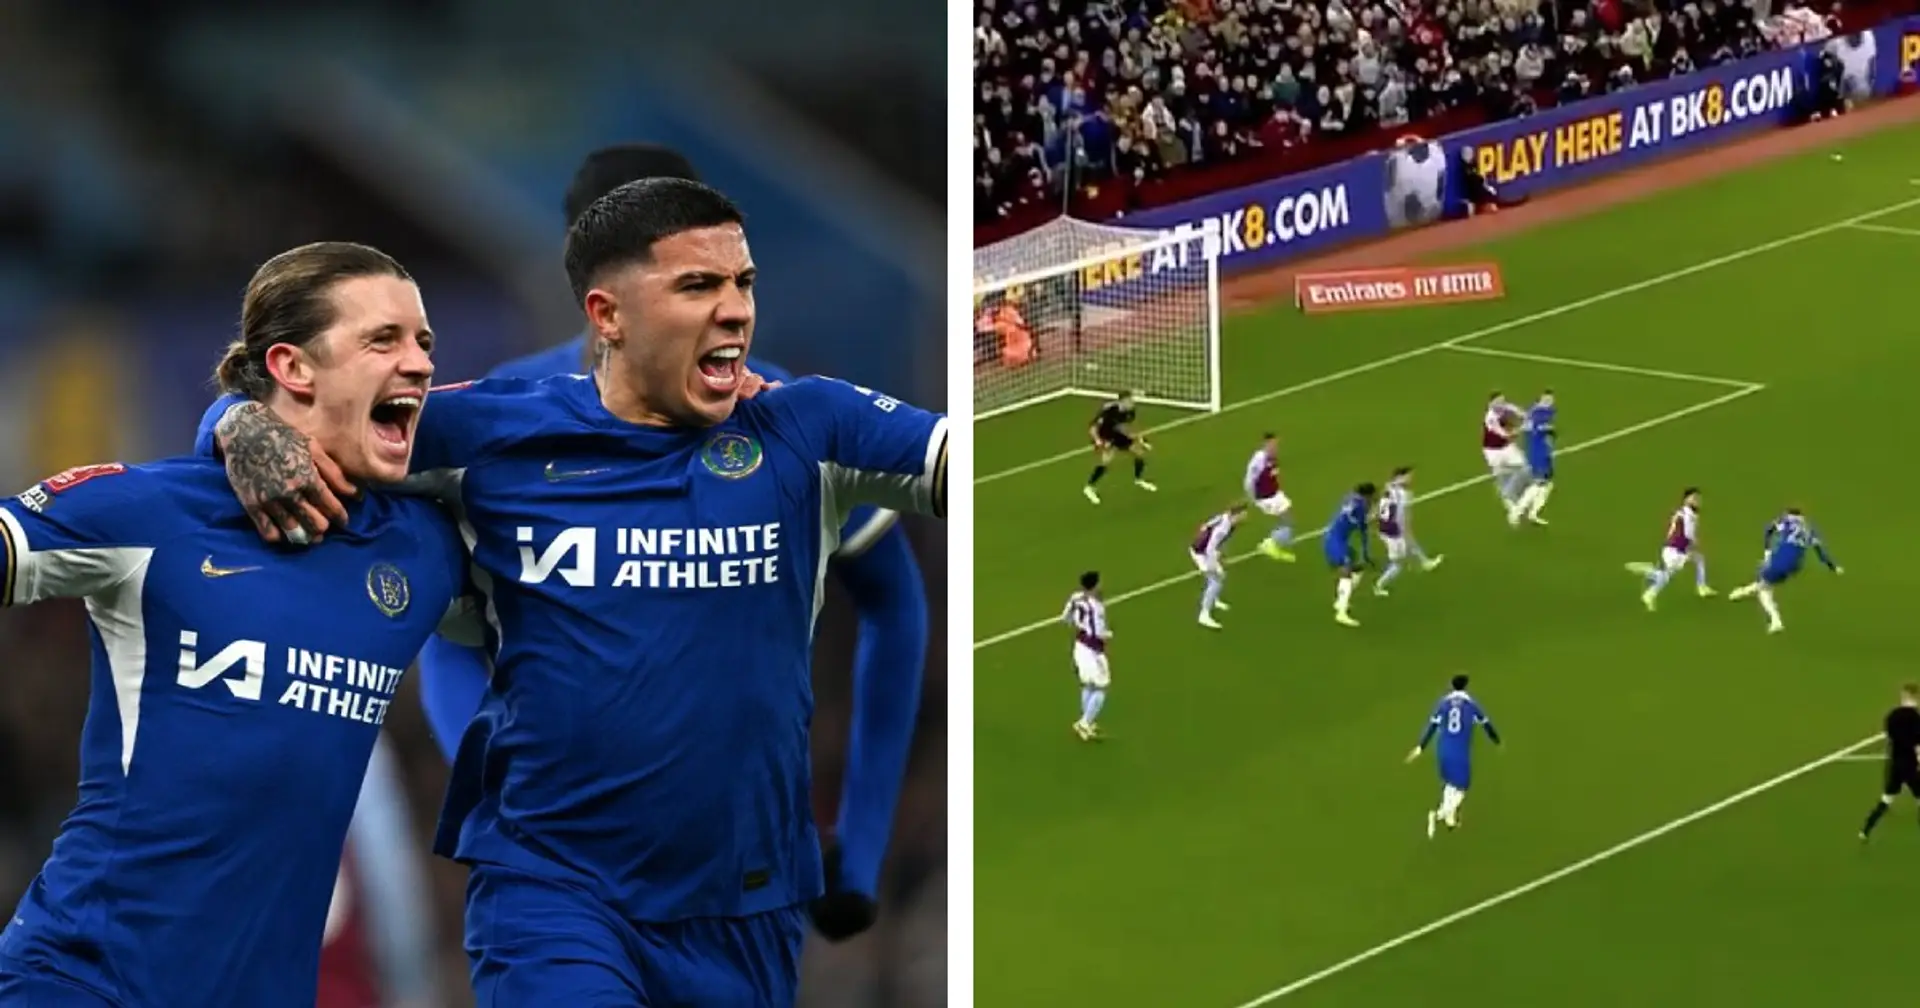 'How sh*t must you be': Chelsea fans' hilarious chants as Gallagher, Jackson give Blues the lead against Villa